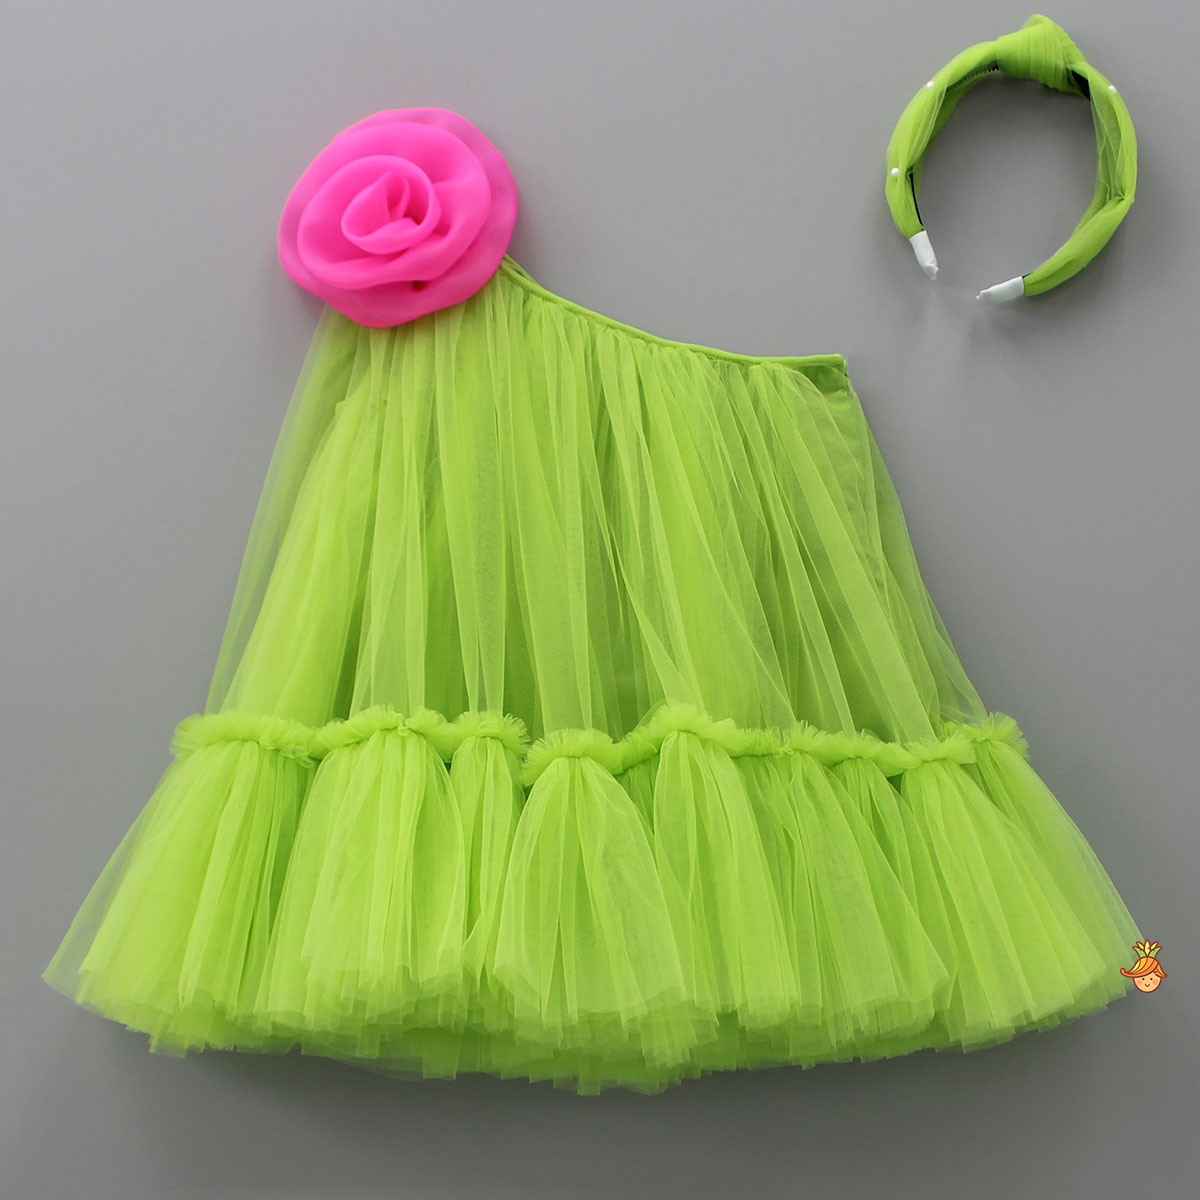 Pre Order: Contrasting Rose Adorned One Shoulder Green Dress With Matching Knot Detail Hair Band